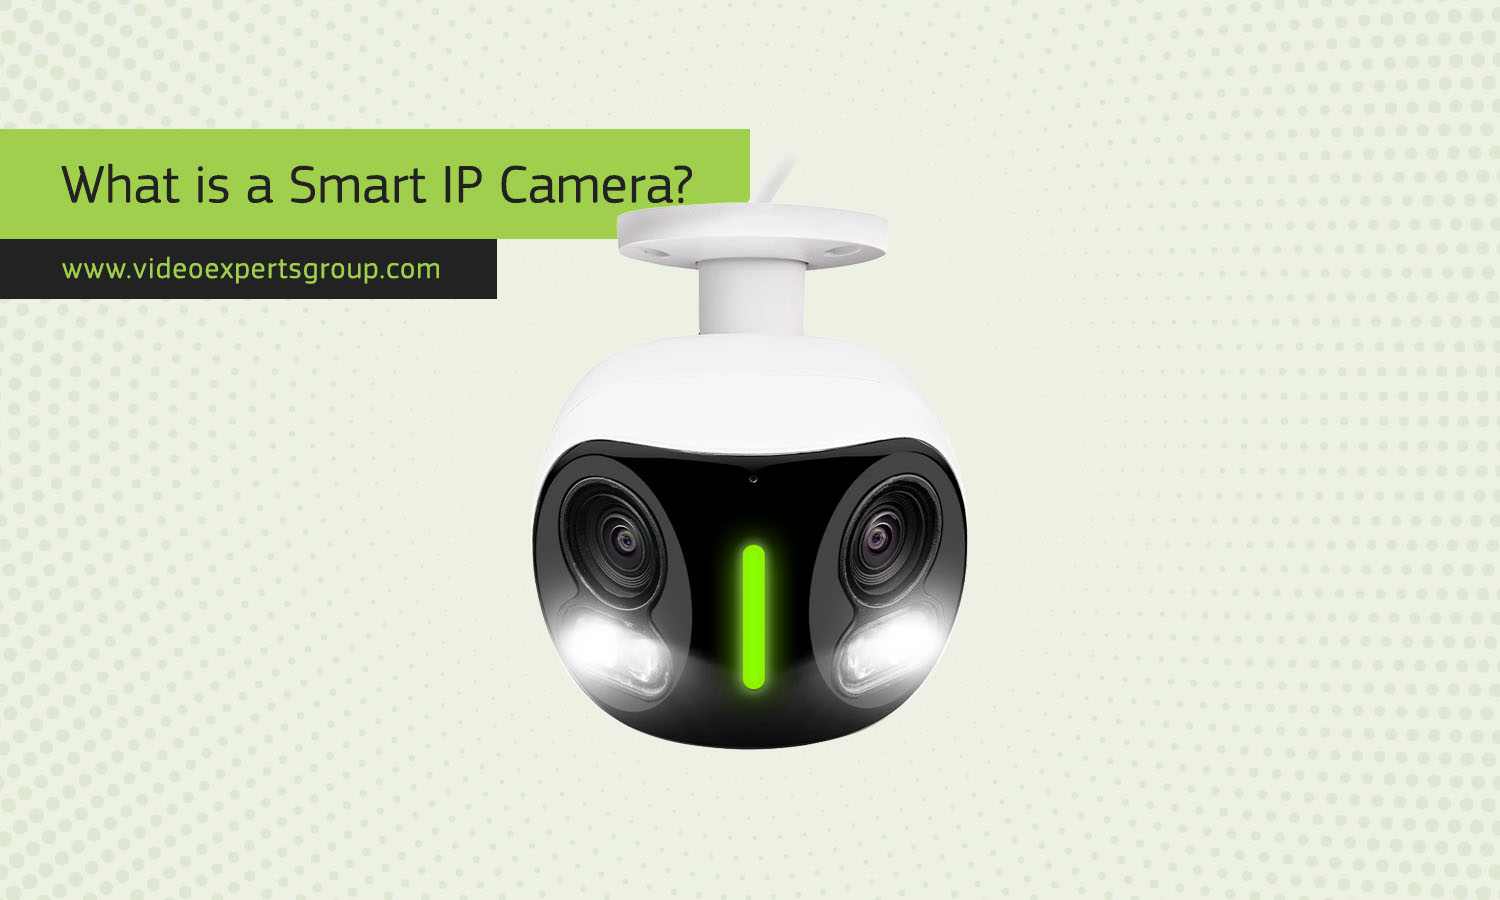 What is a Smart IP Camera?